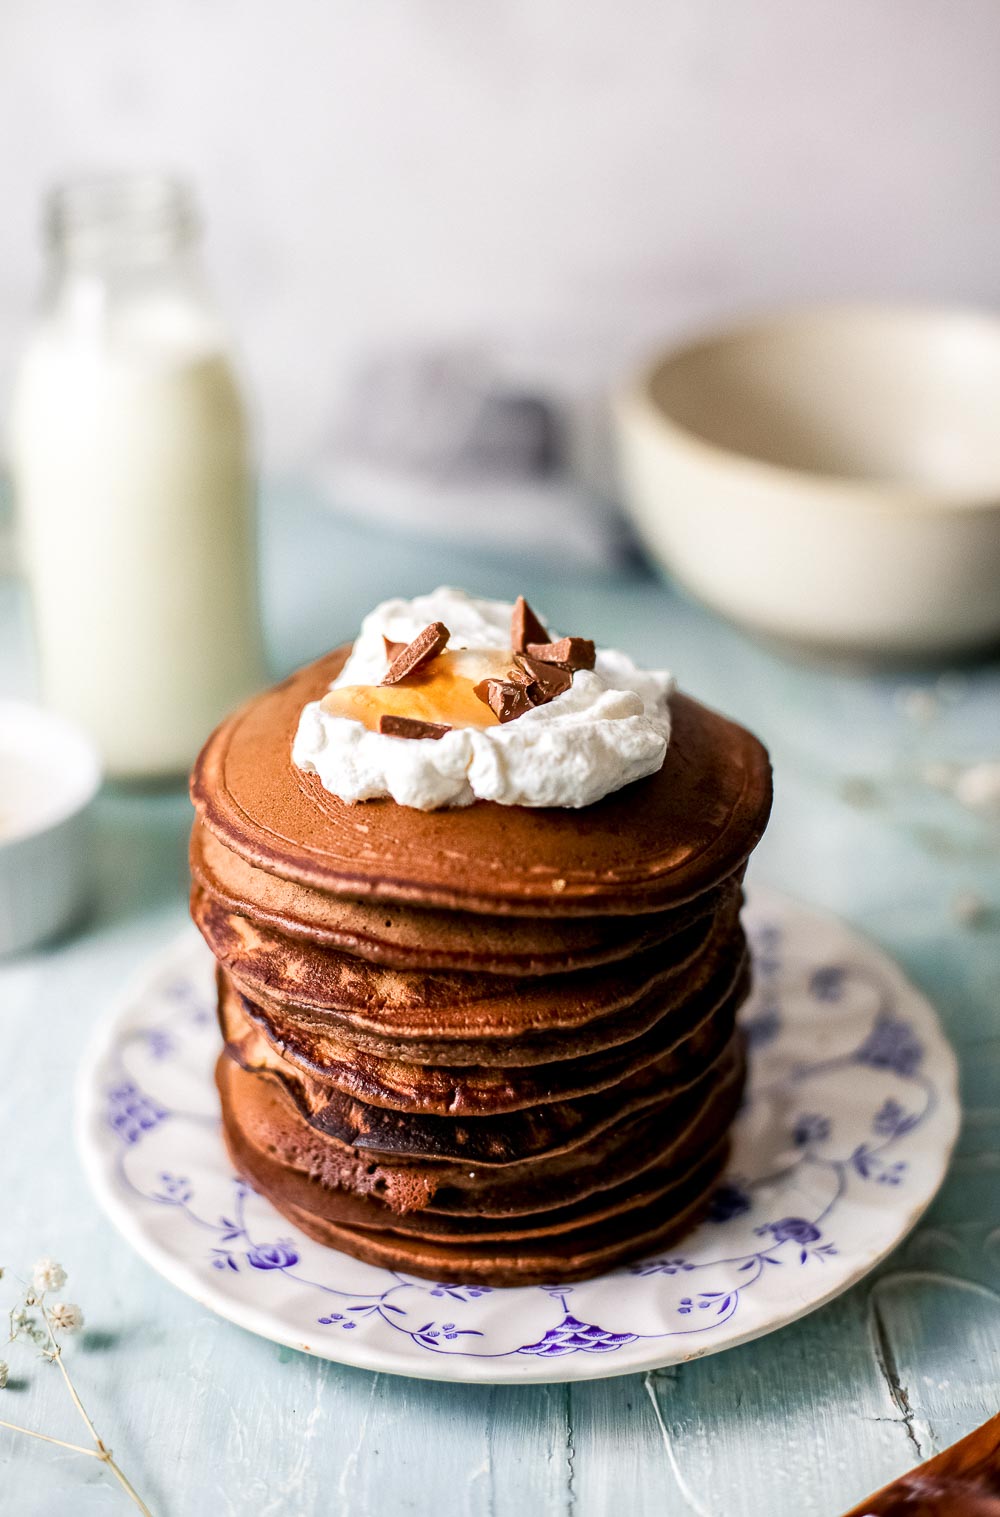 Pancakes, anyone? These chocolate pancakes are fluffy, hearty, and make the perfect weekend breakfast or brunch. Best of all, you can mix the ingredients in a blender. And don't forget to check more brunch ideas on the blog.